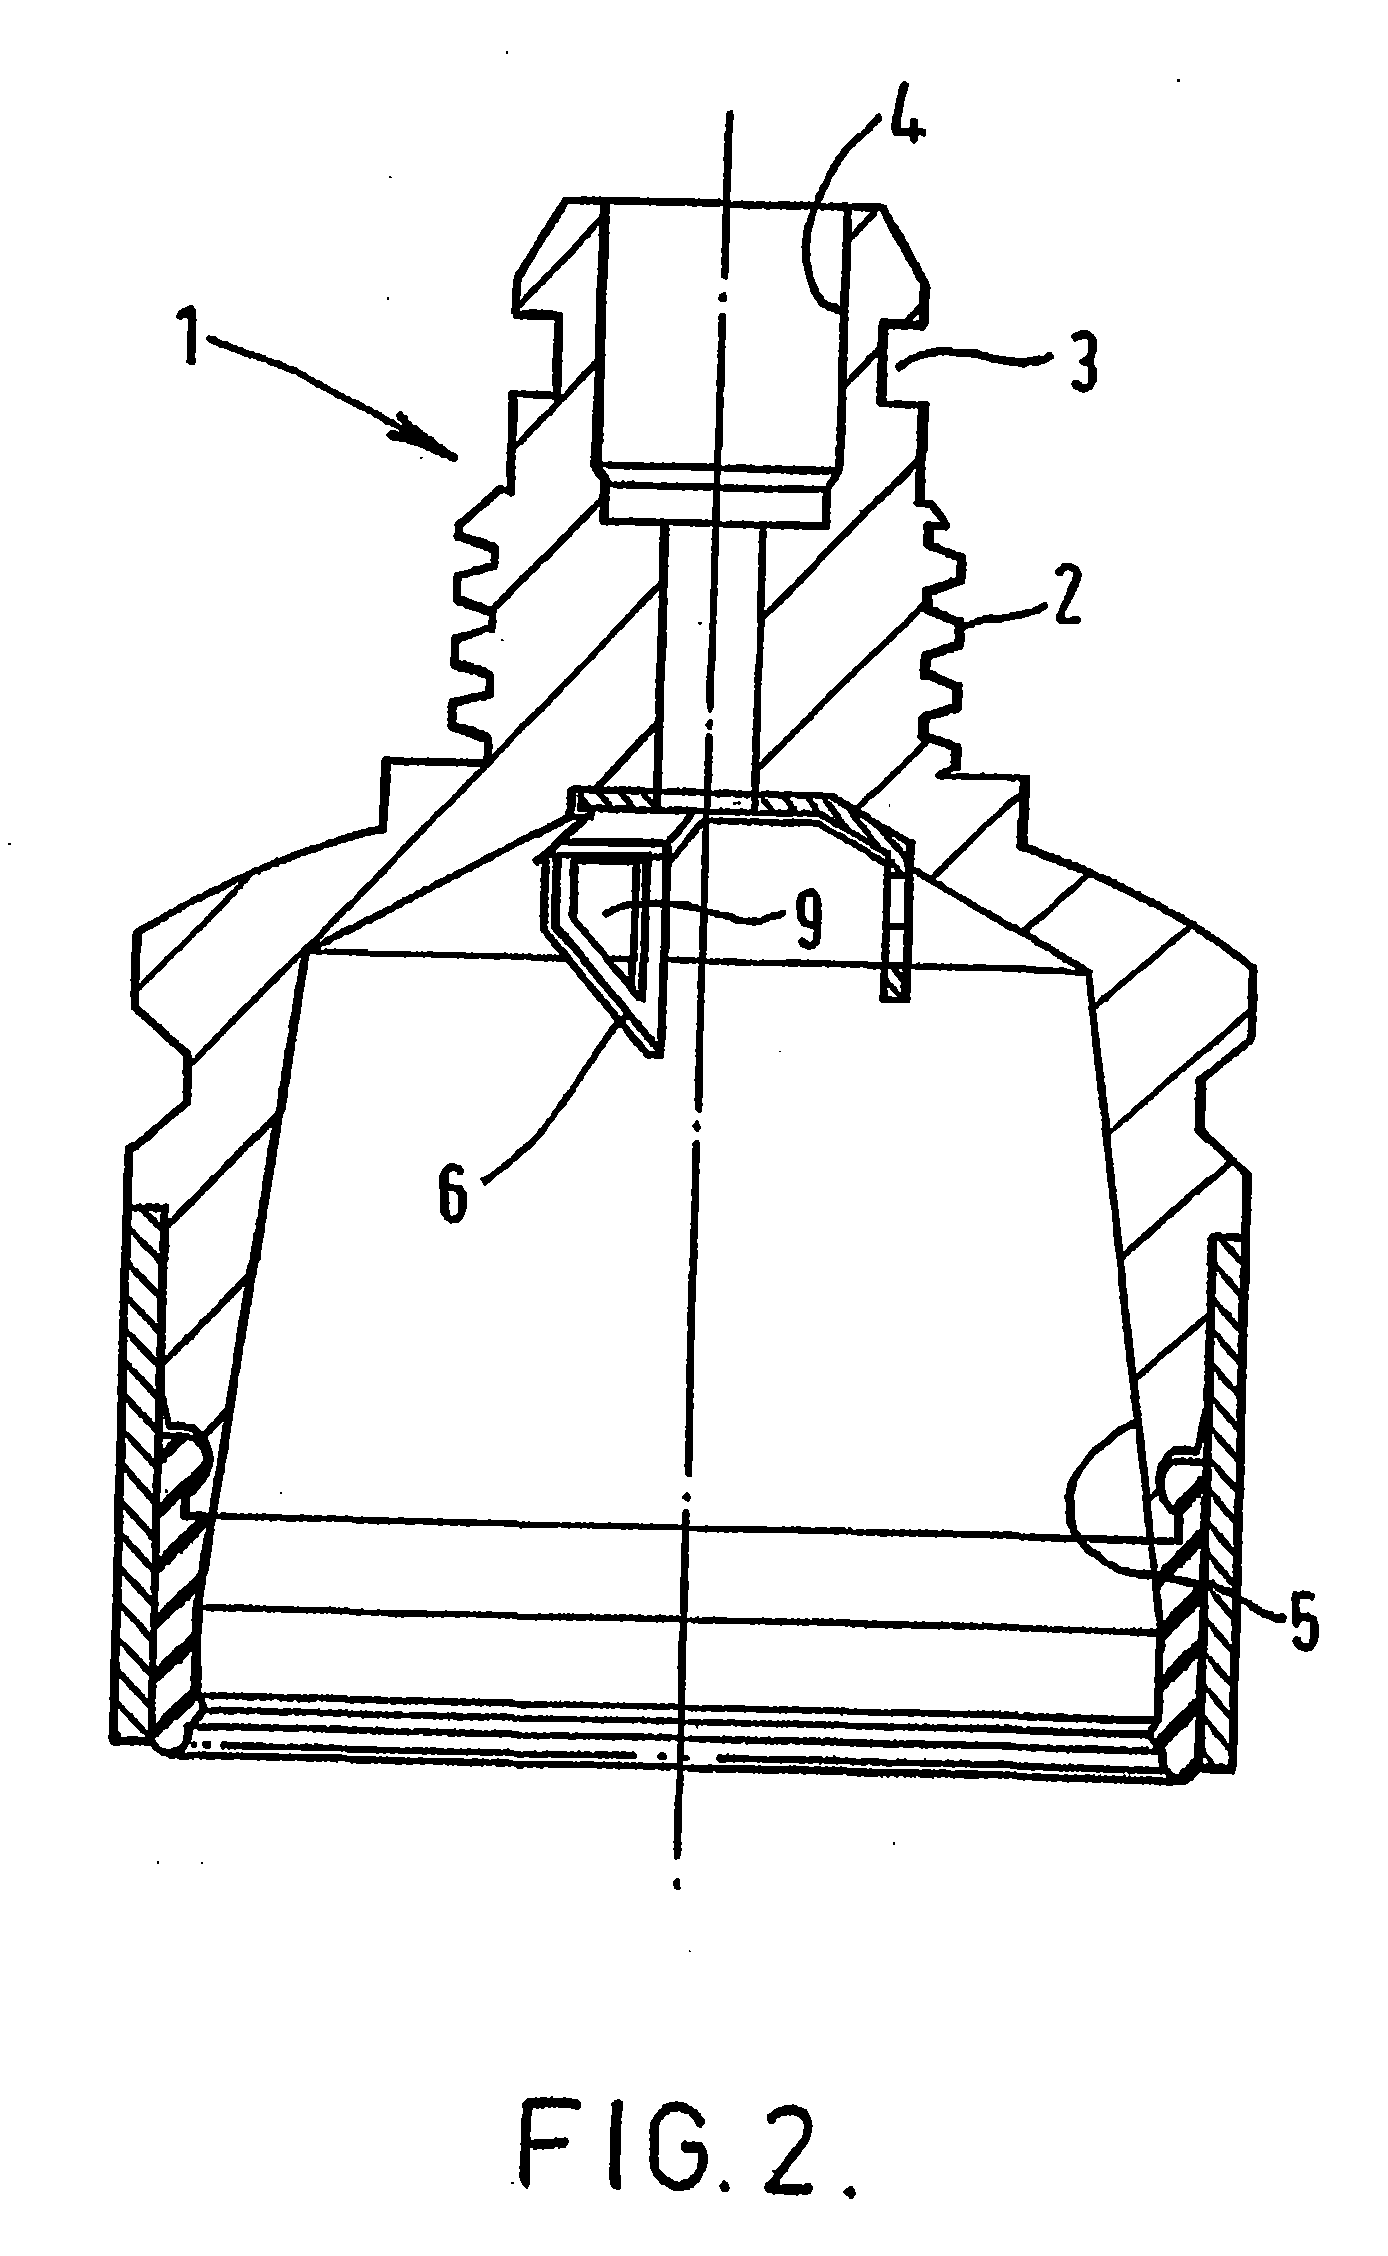 Closed cartridge for preparing a beverage for extraction under pressure